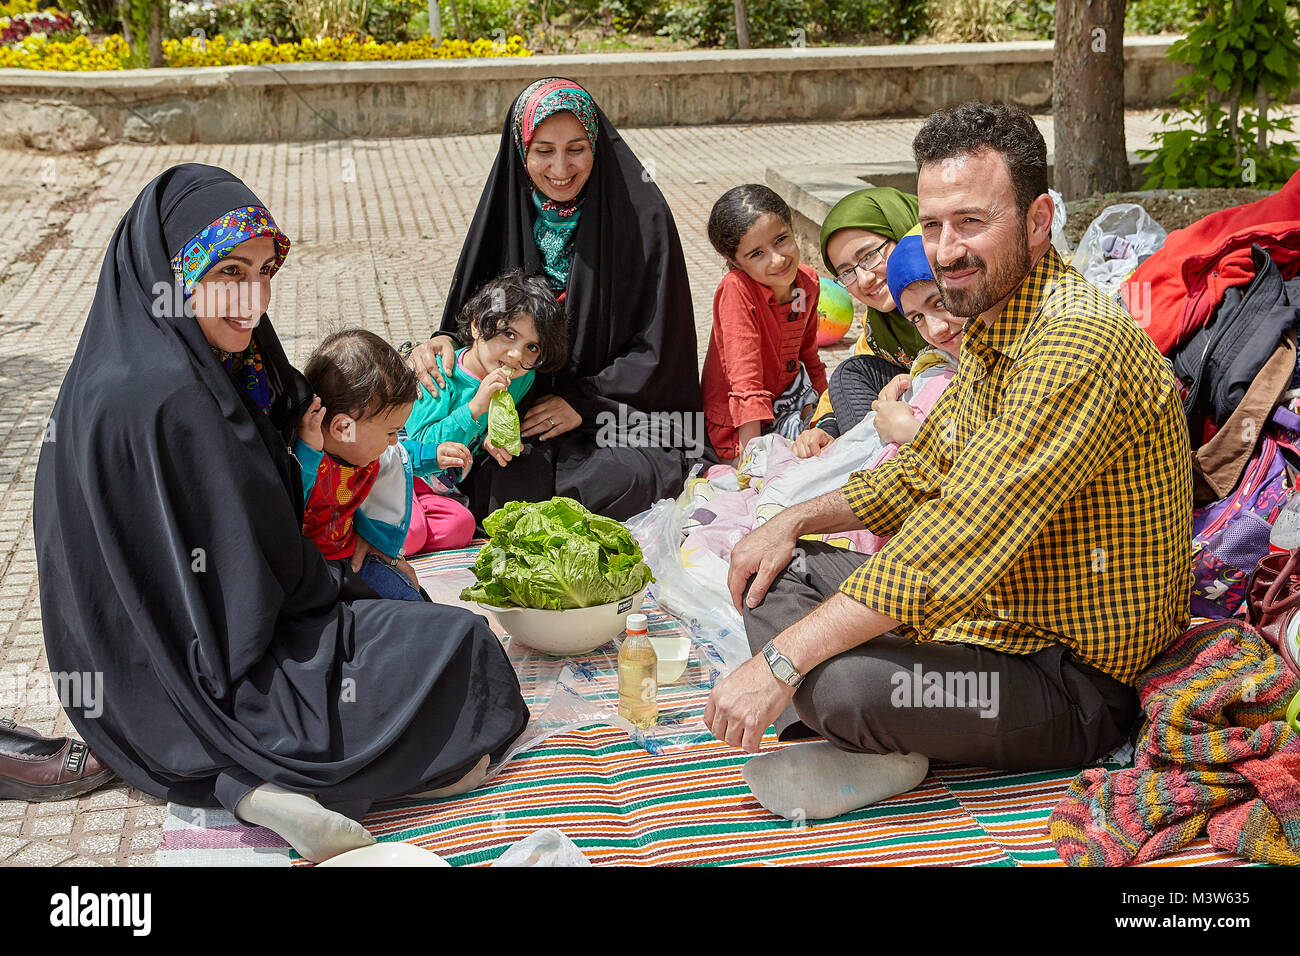 Tehran, Iran - April 28, 2017: Iranian man, children and women in hijabs sit in the park on a picnic on the day off, they smile and laugh. Stock Photo